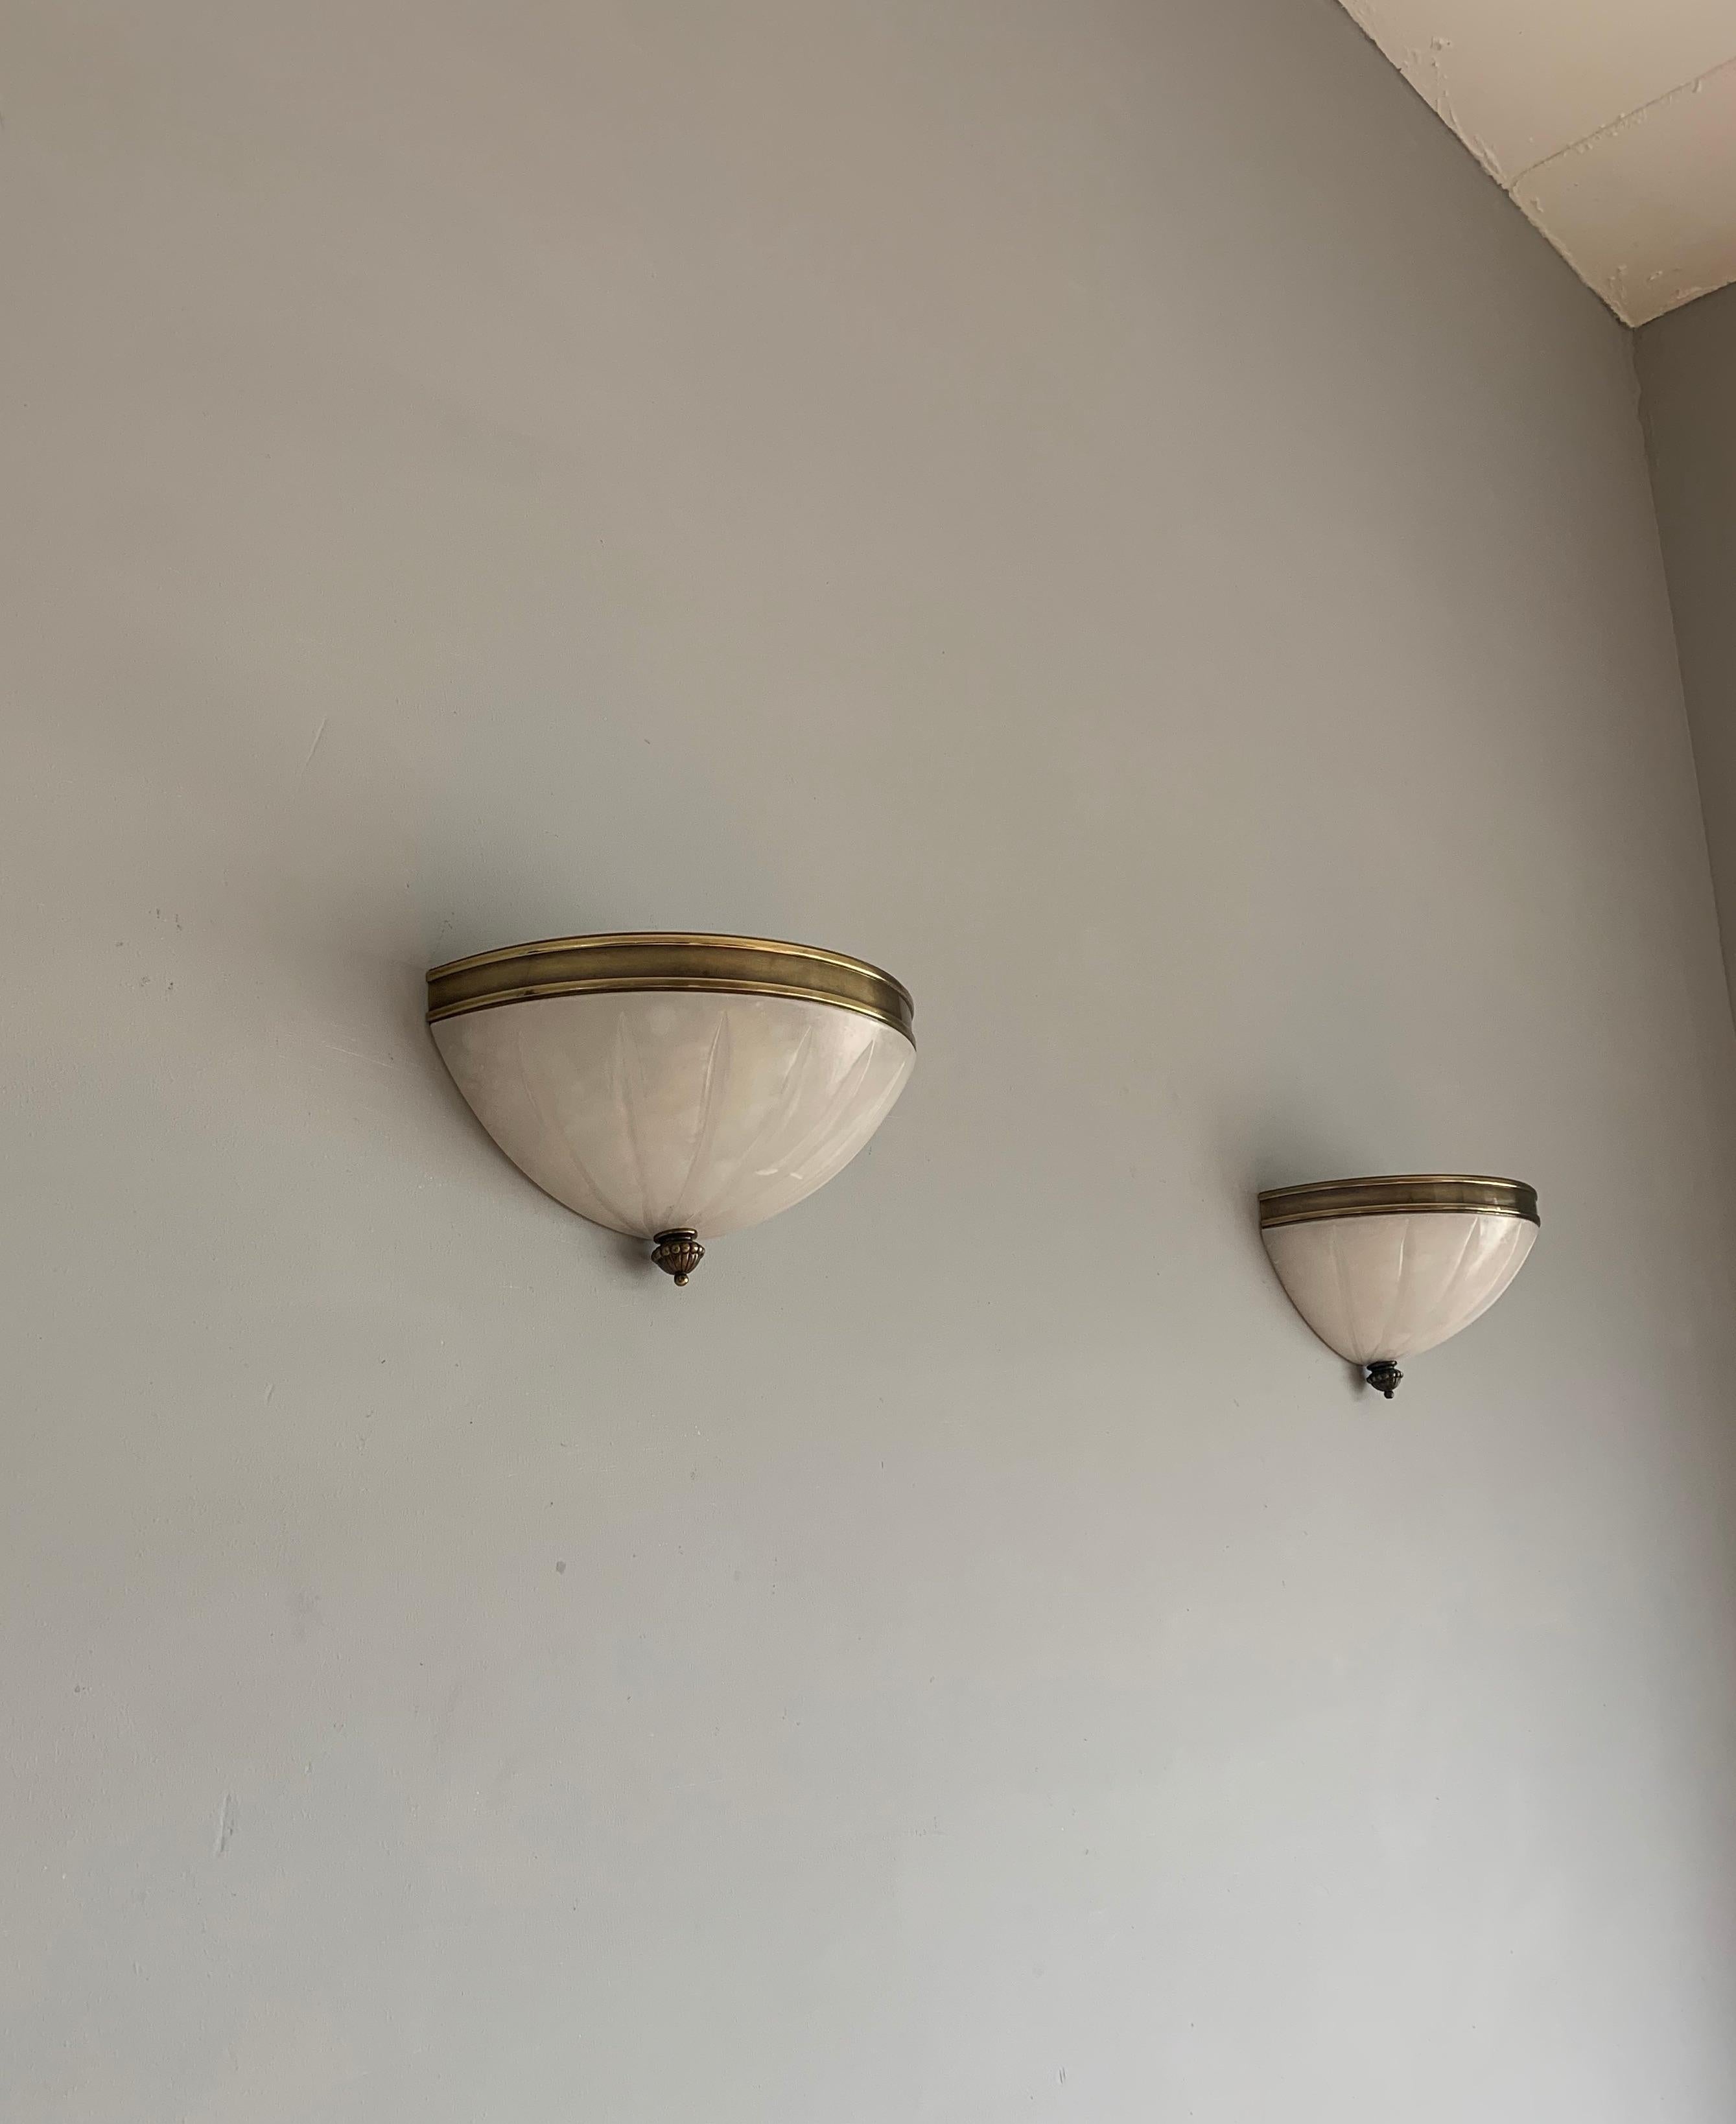 Rare Pair of Midcentury Modern, Alabaster & Brass Wall Sconces / Fixtures For Sale 3